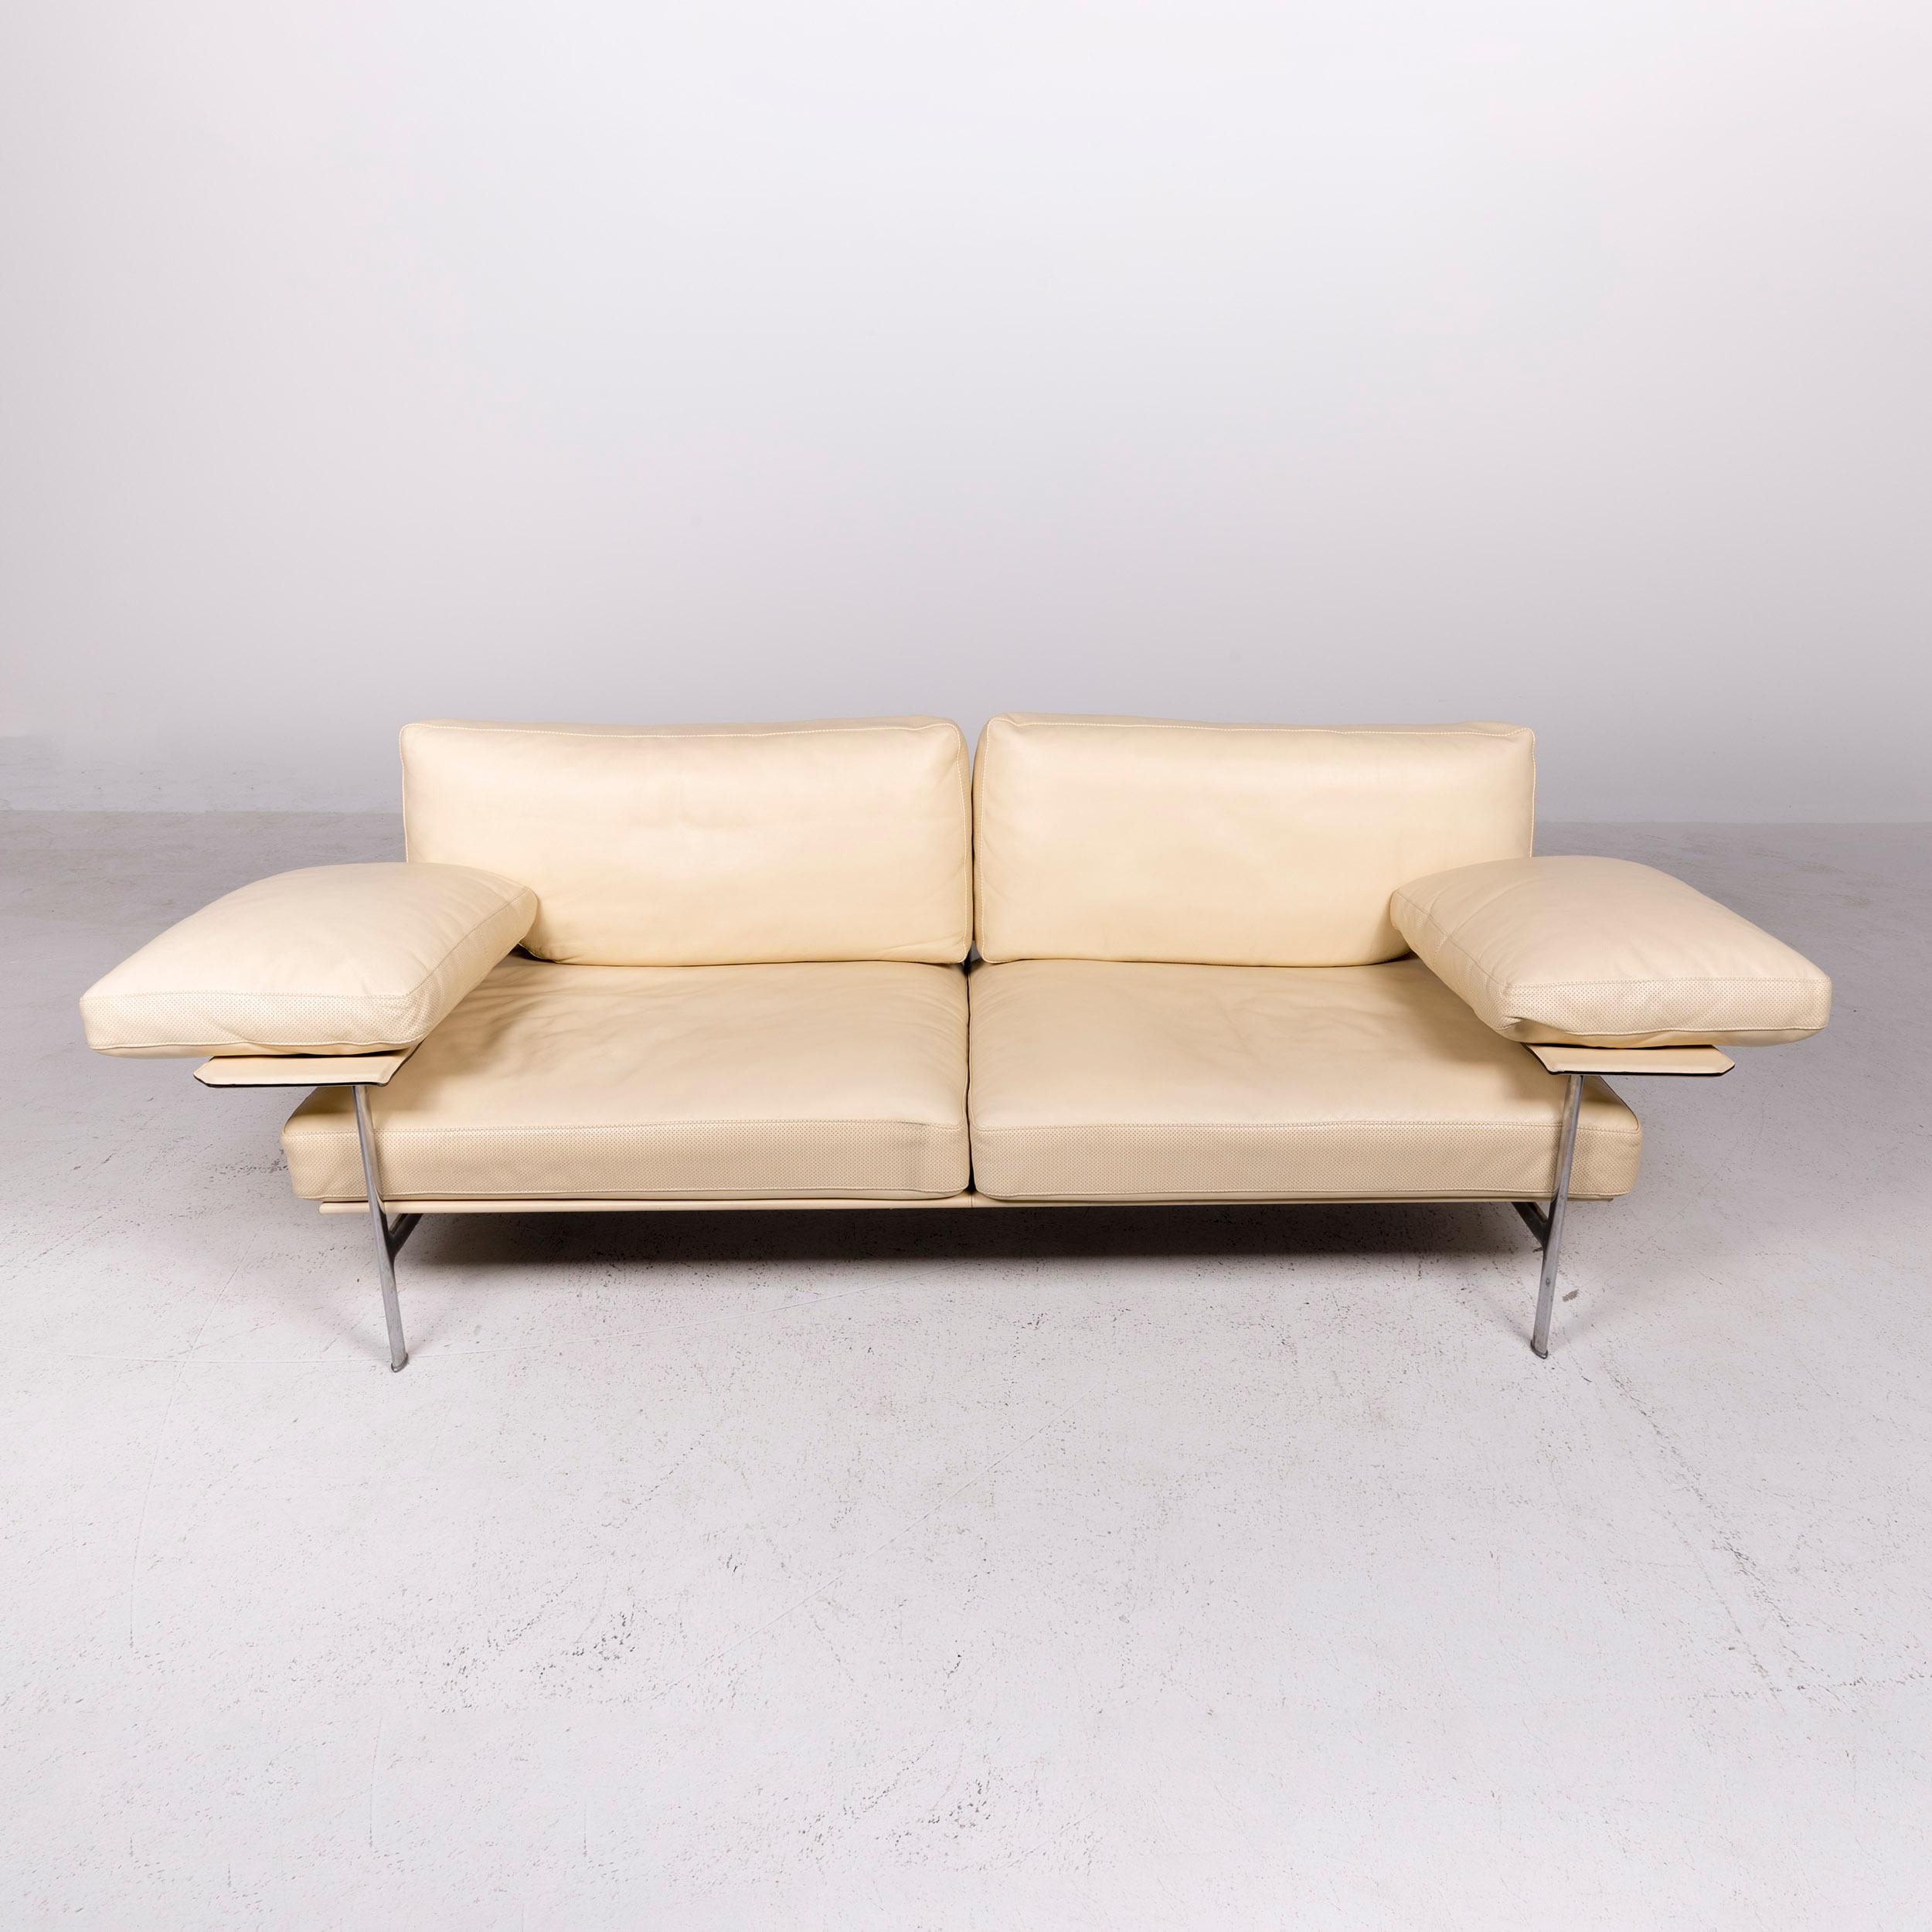 B & B Italia Diesis Designer Leather Sofa Beige Real Leather Three-Seat Couch For Sale 1